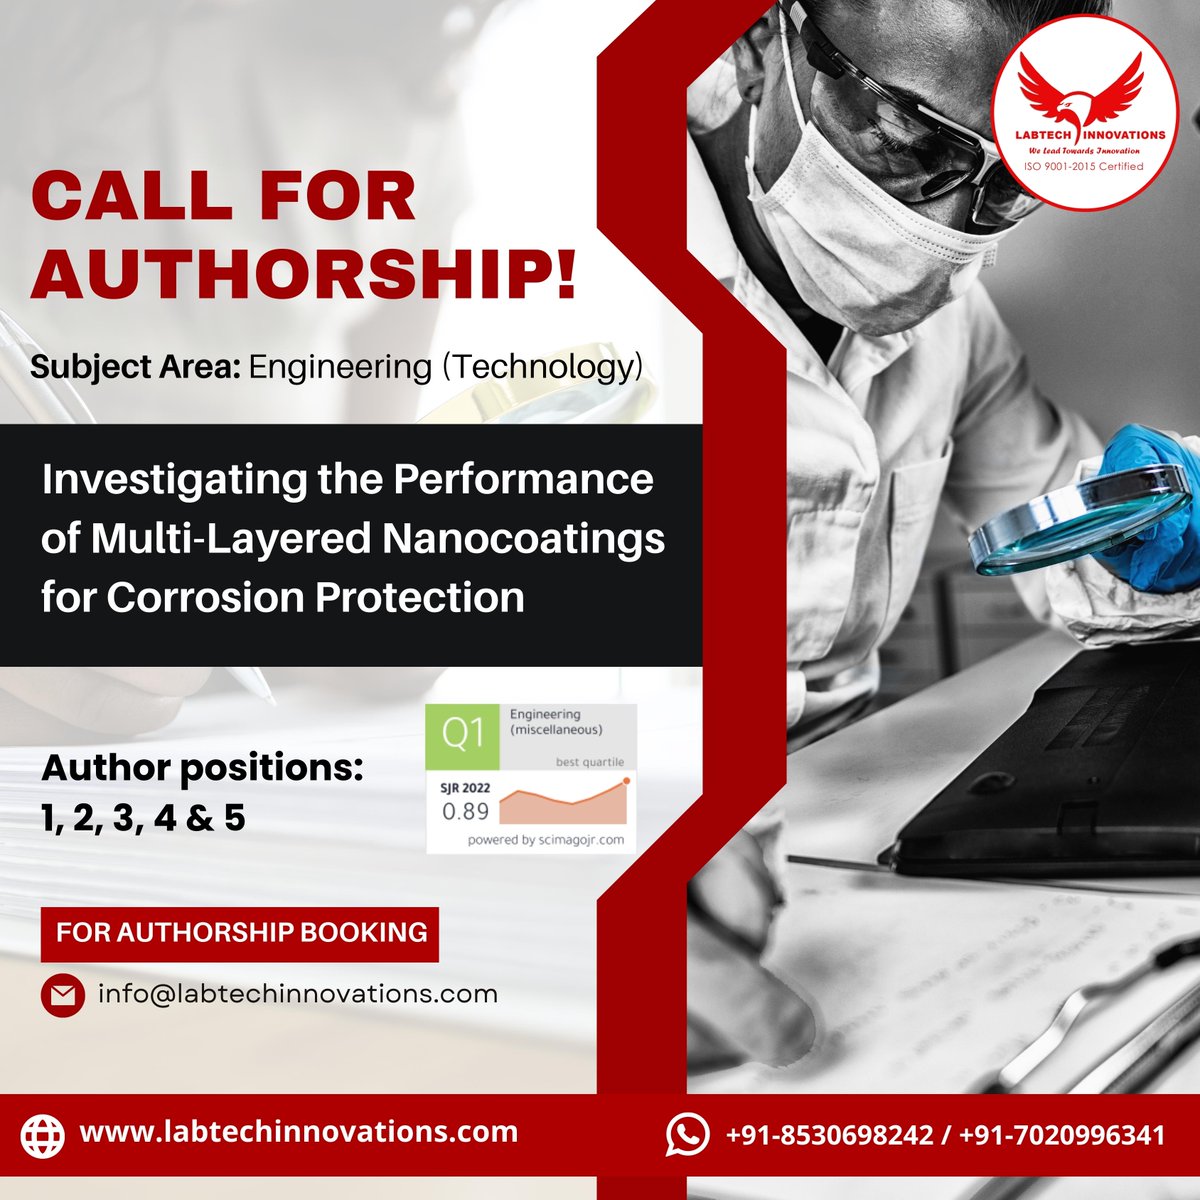 Attention, engineers! Contact us at info@labtechinnovations.com to book your authorship or WhatsApp at zcu.io/uVjP #multilayered #nanocoating #corrosionprotection #EngineeringTechnology #authorship #protectivecoatings #materialsscience #authorcommunity  #writers